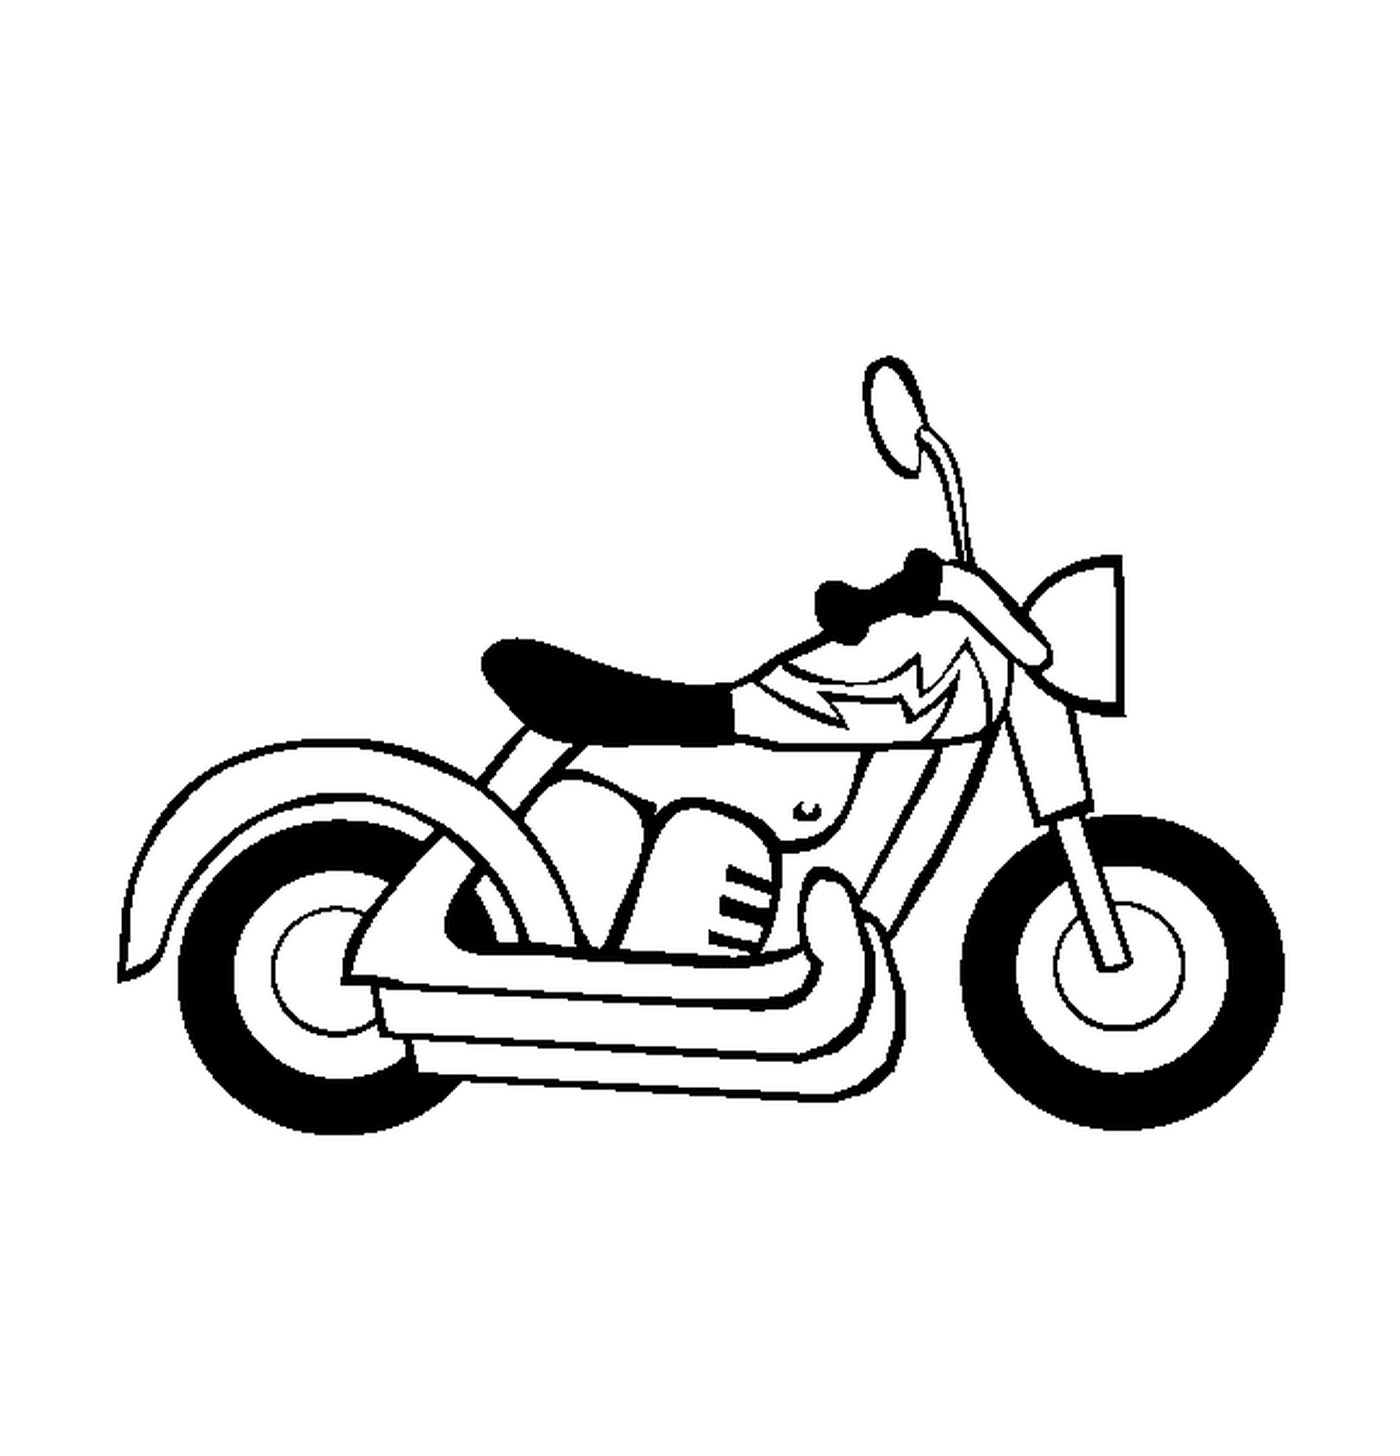  Easy and simple motorcycle 